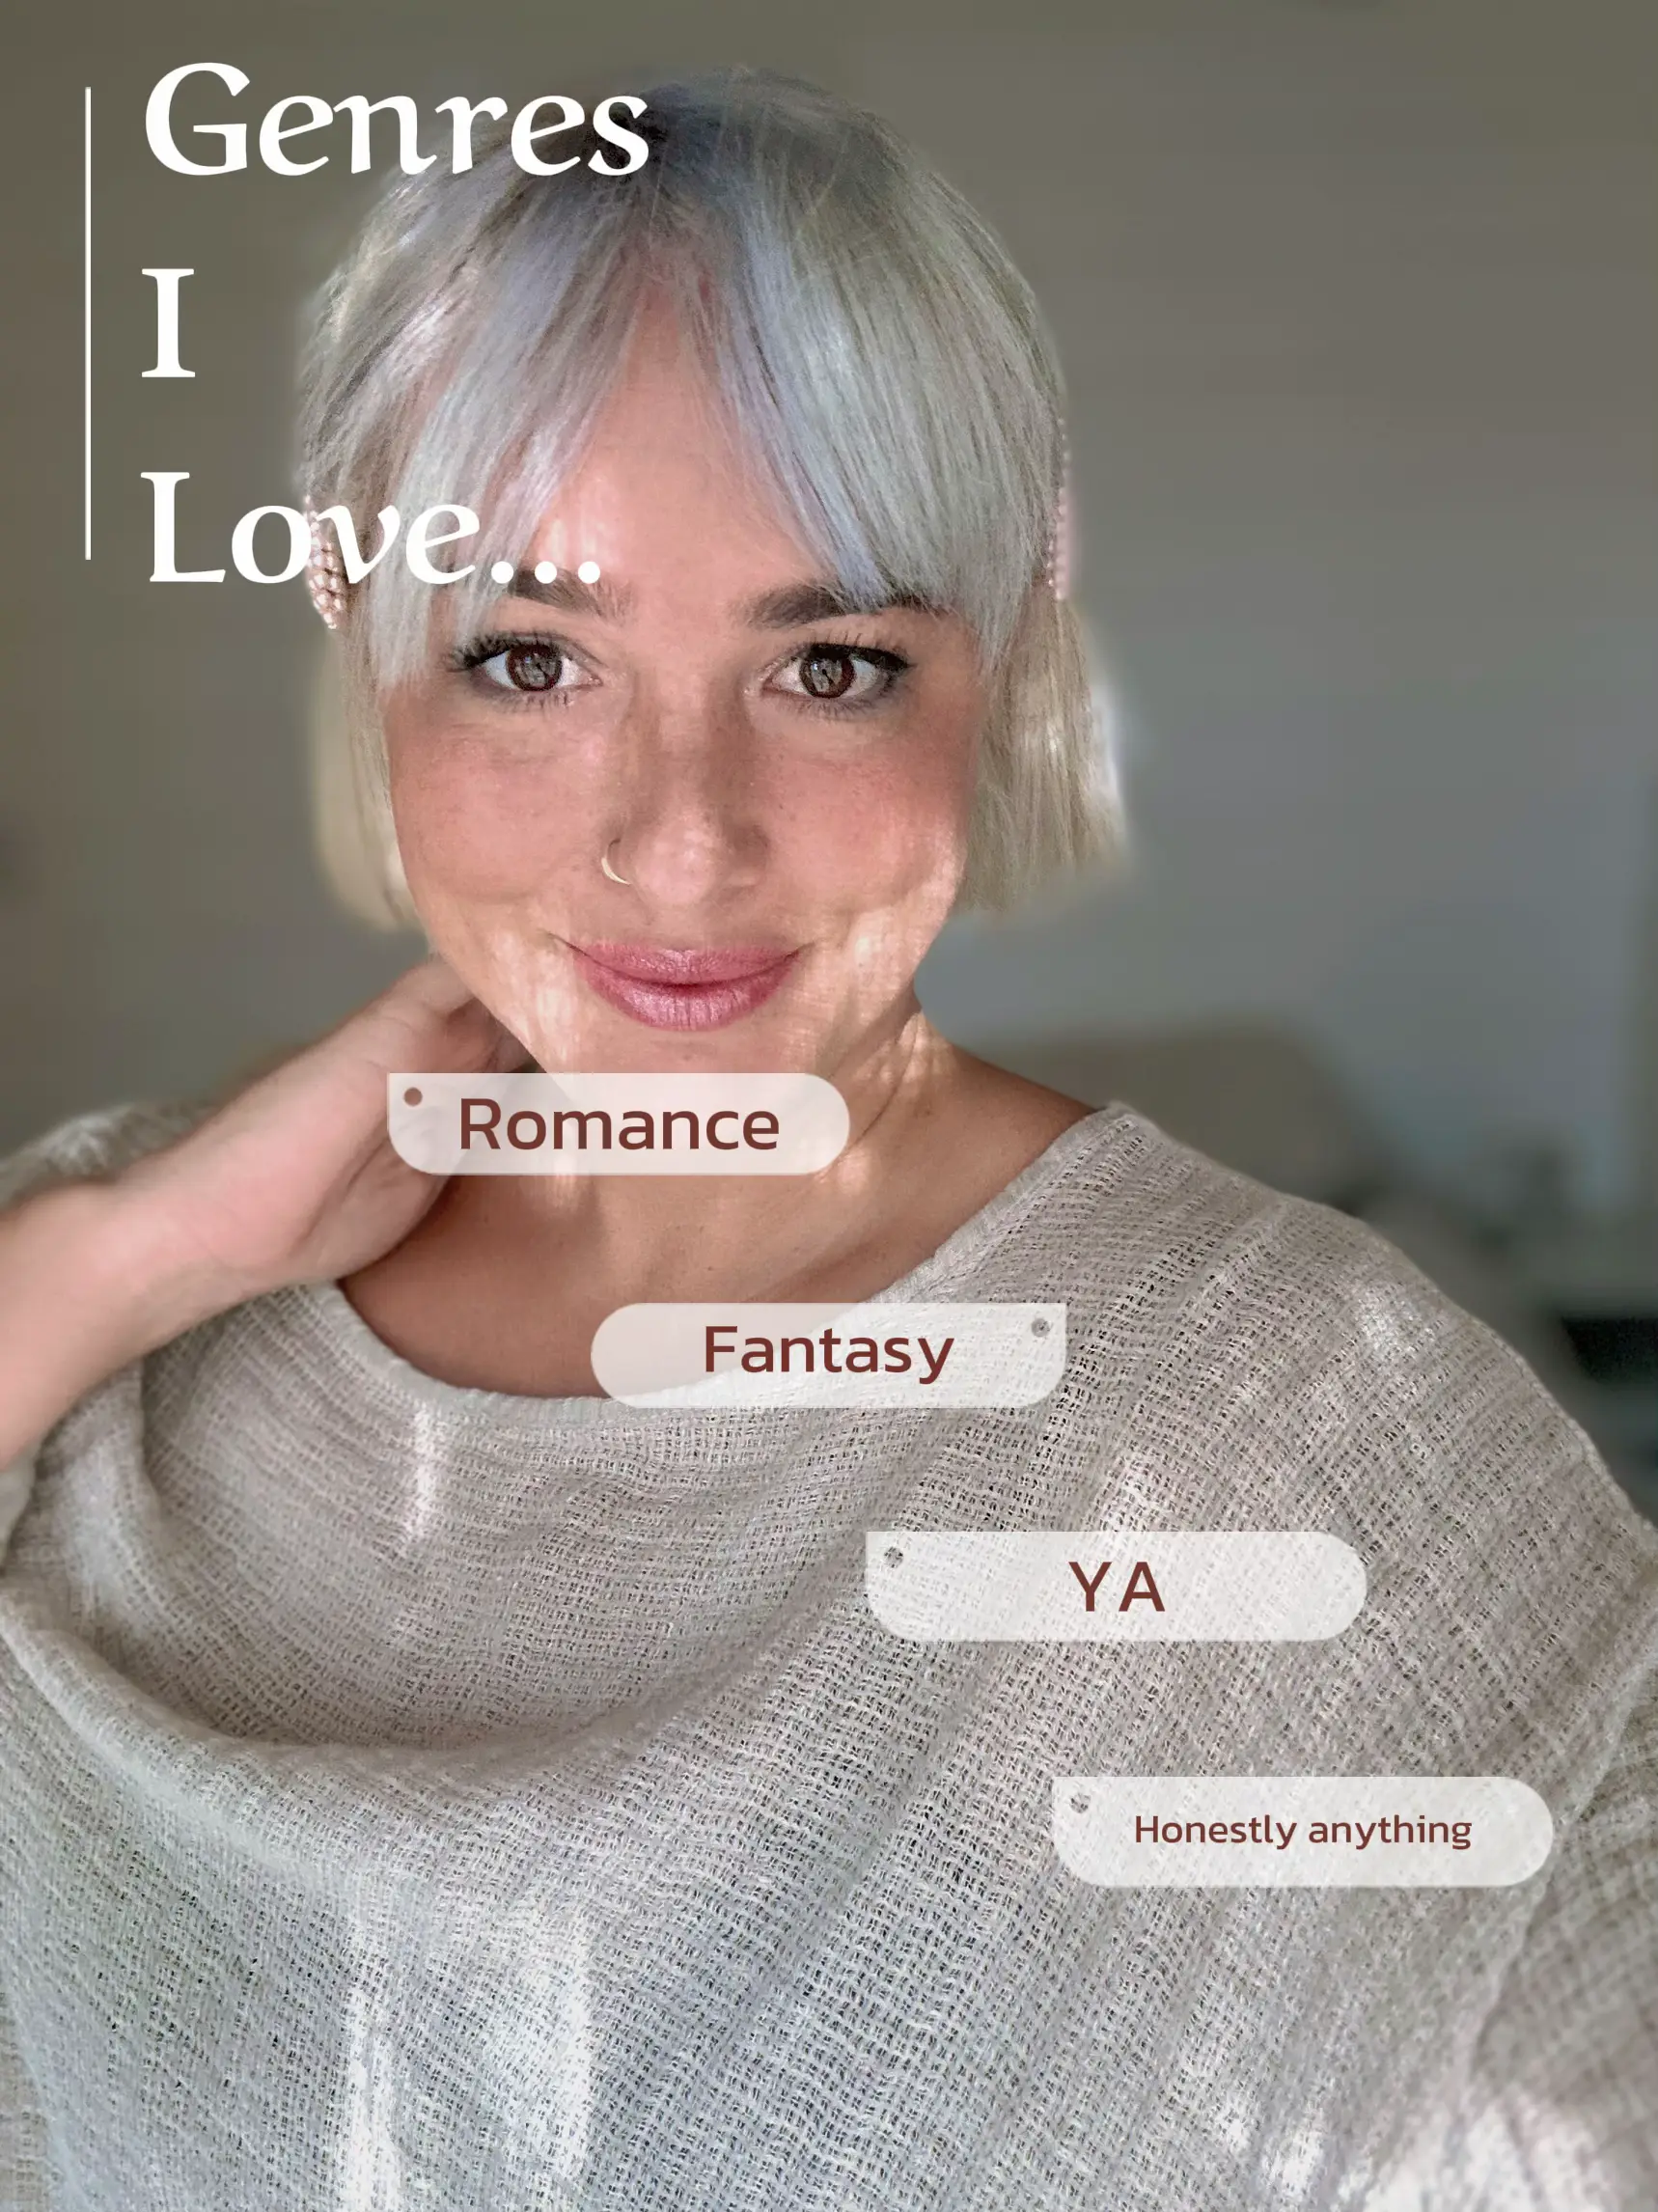  A woman is shown with a list of genres she loves.